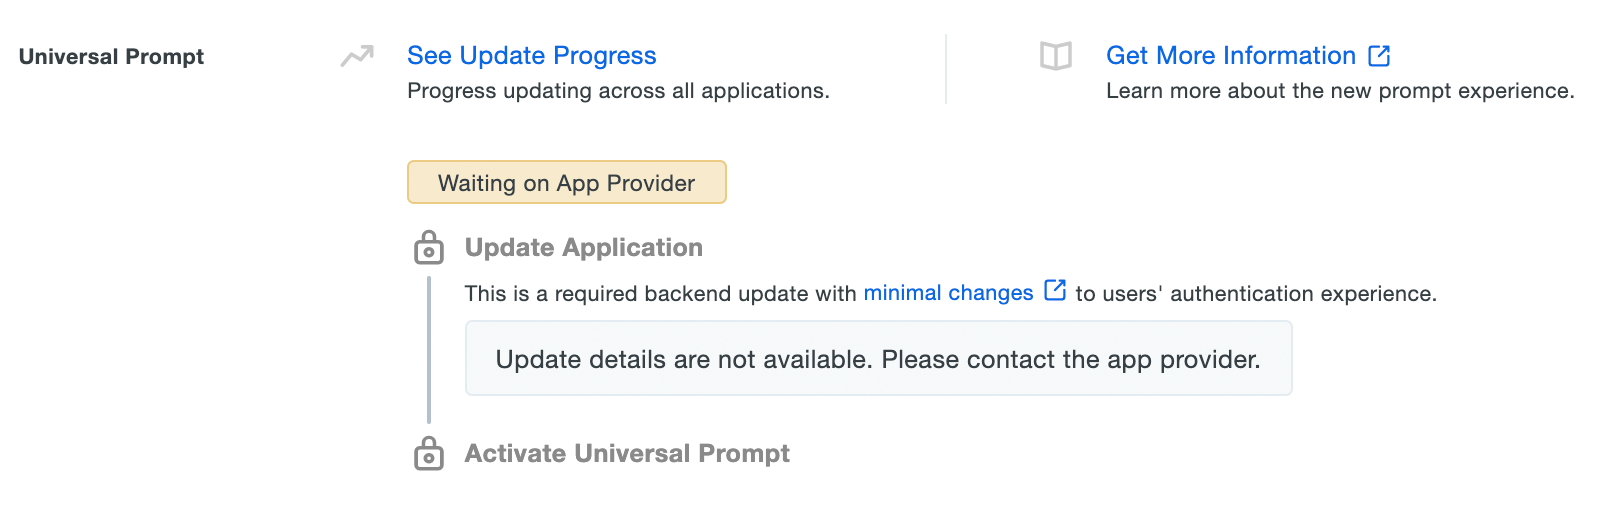 Universal Prompt Info - Update Not Yet Available